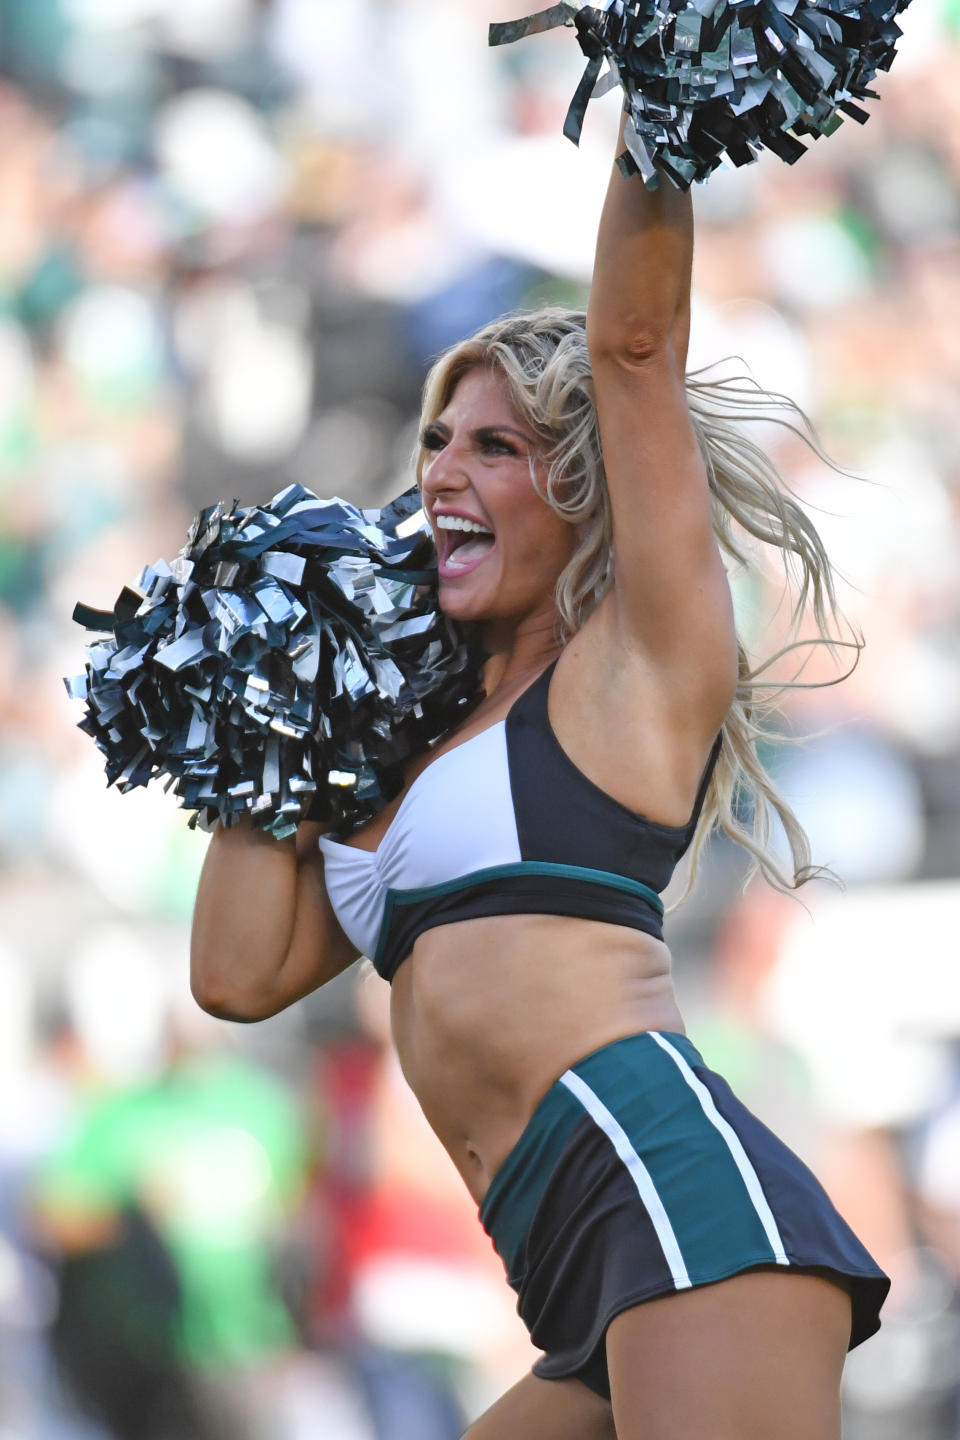 Oct 1, 2023; Philadelphia, Pennsylvania, USA; Philadelphia Eagles cheerleader performs against the Washington Commanders during the fourth quarter at Lincoln Financial Field. Mandatory Credit: Eric Hartline-USA TODAY Sports